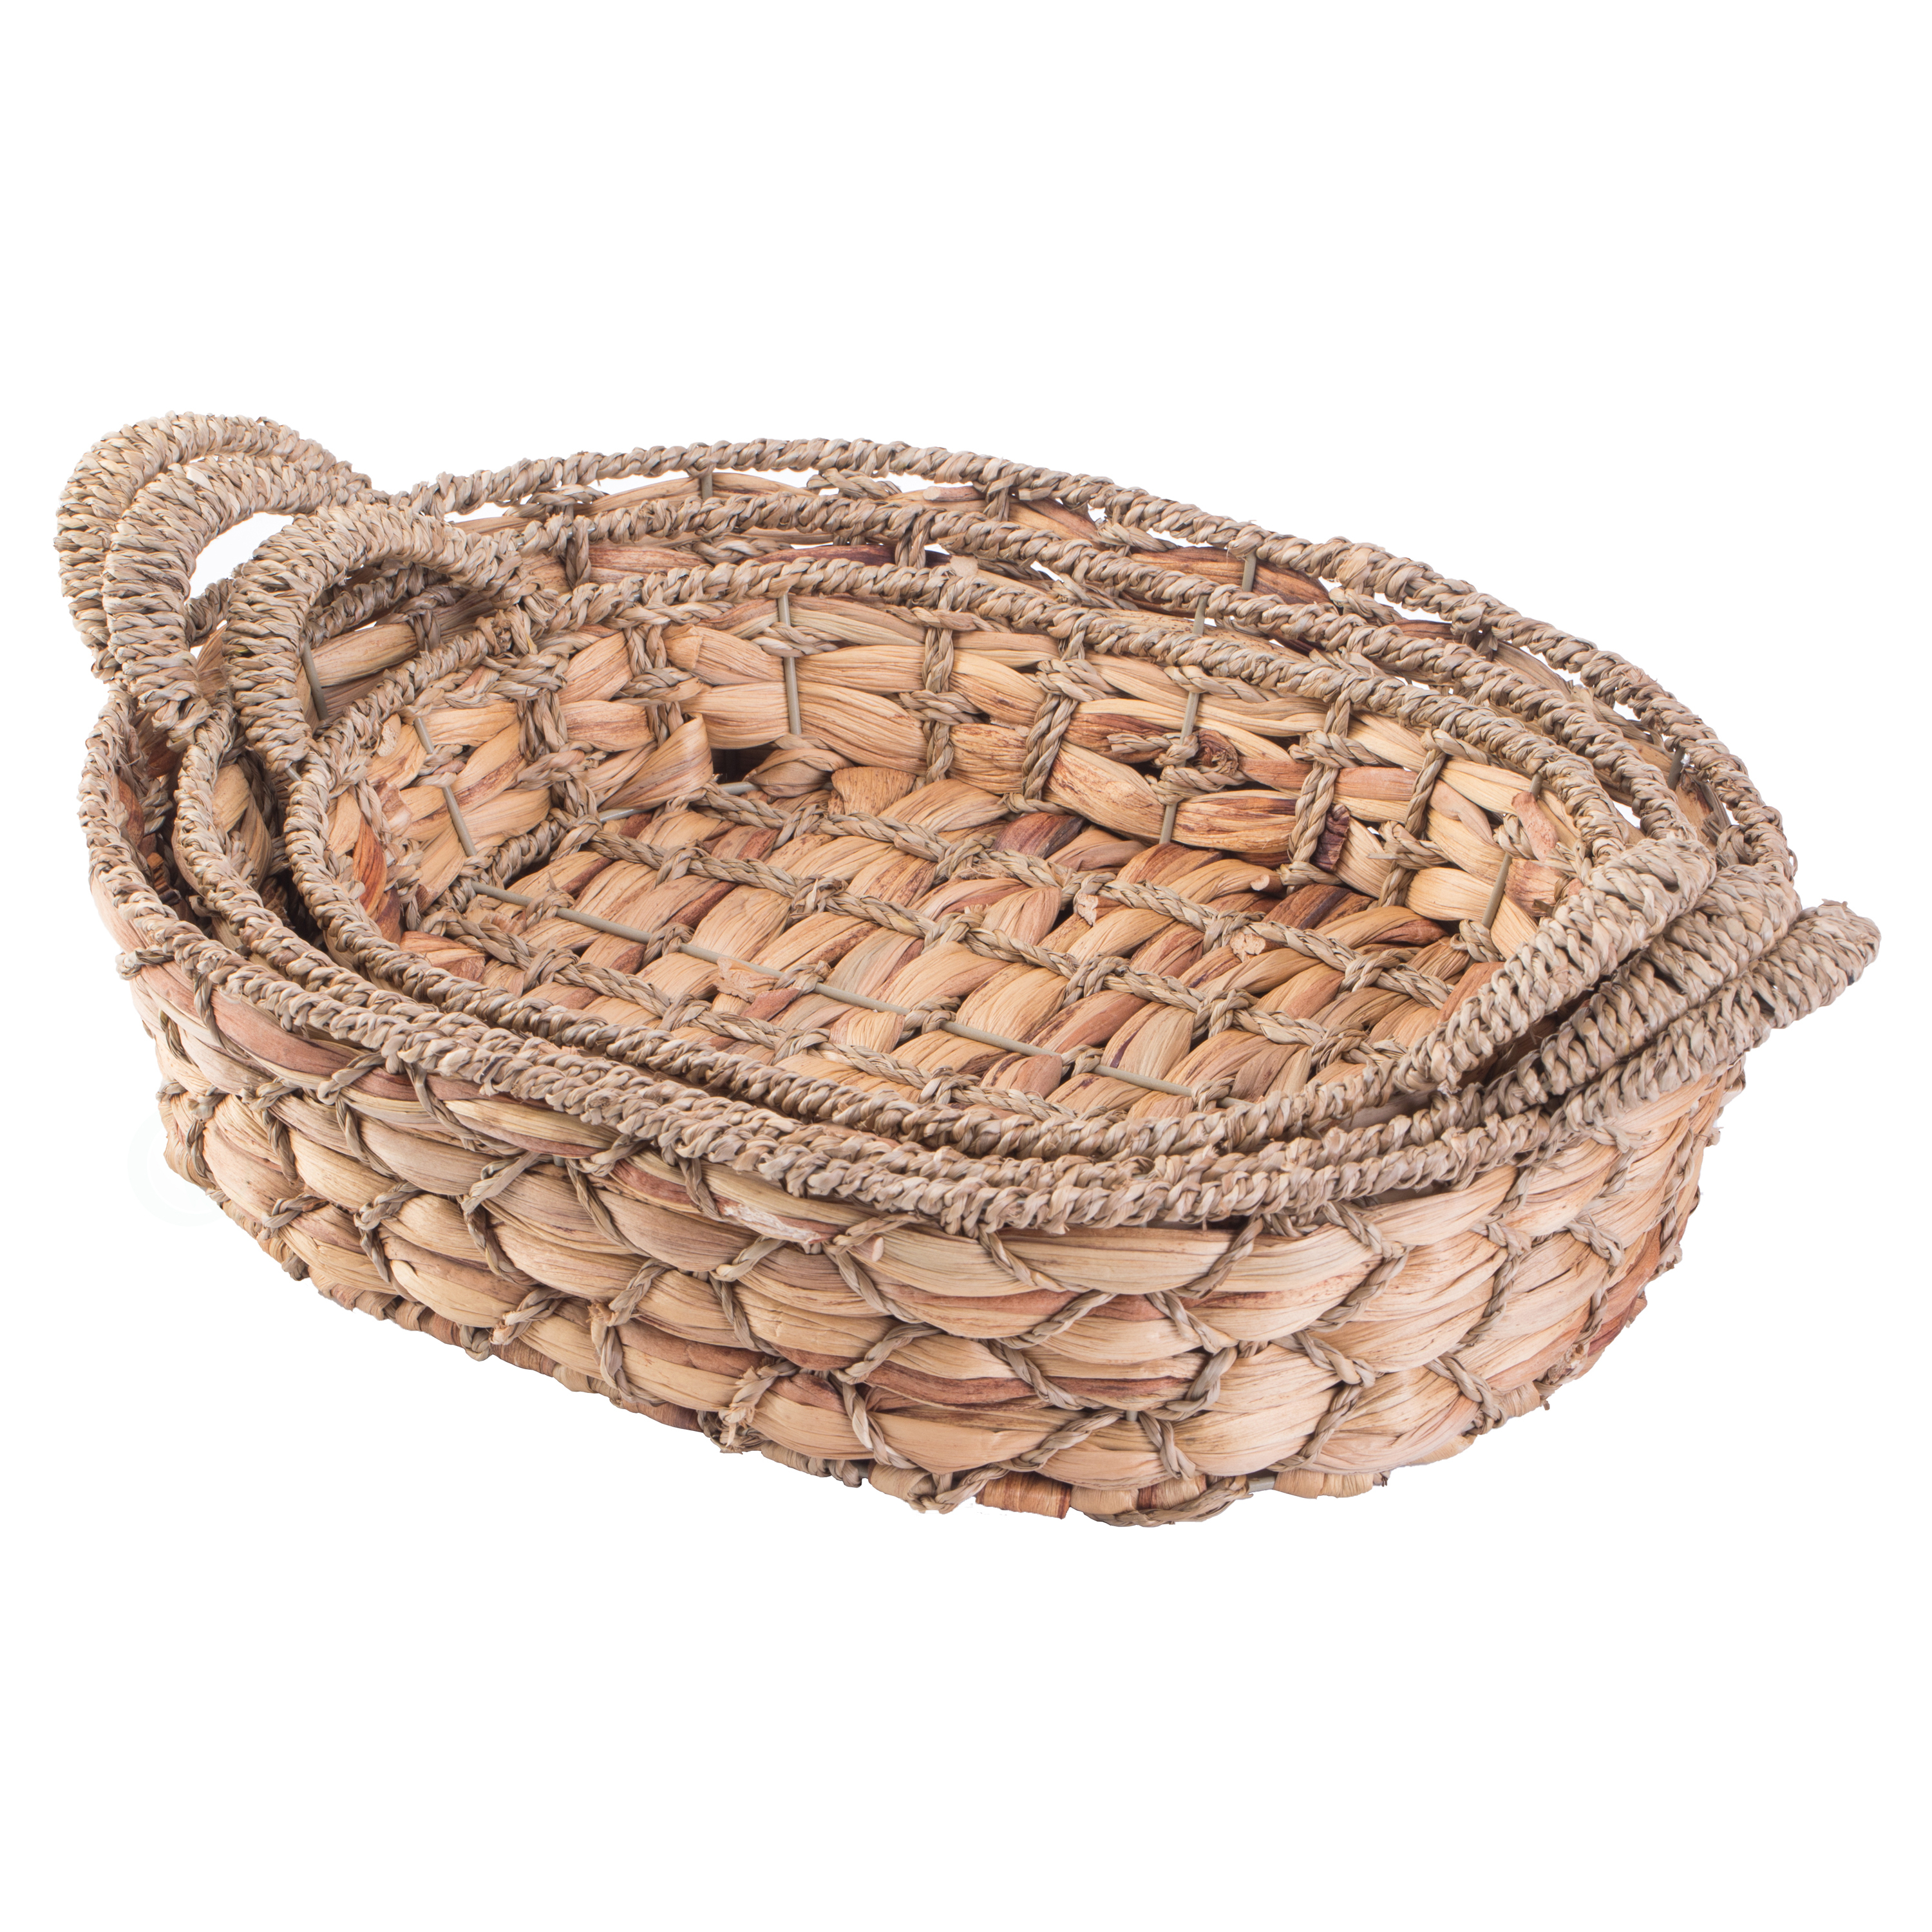 Seagrass Fruit Bread Basket Tray With Handles - Small